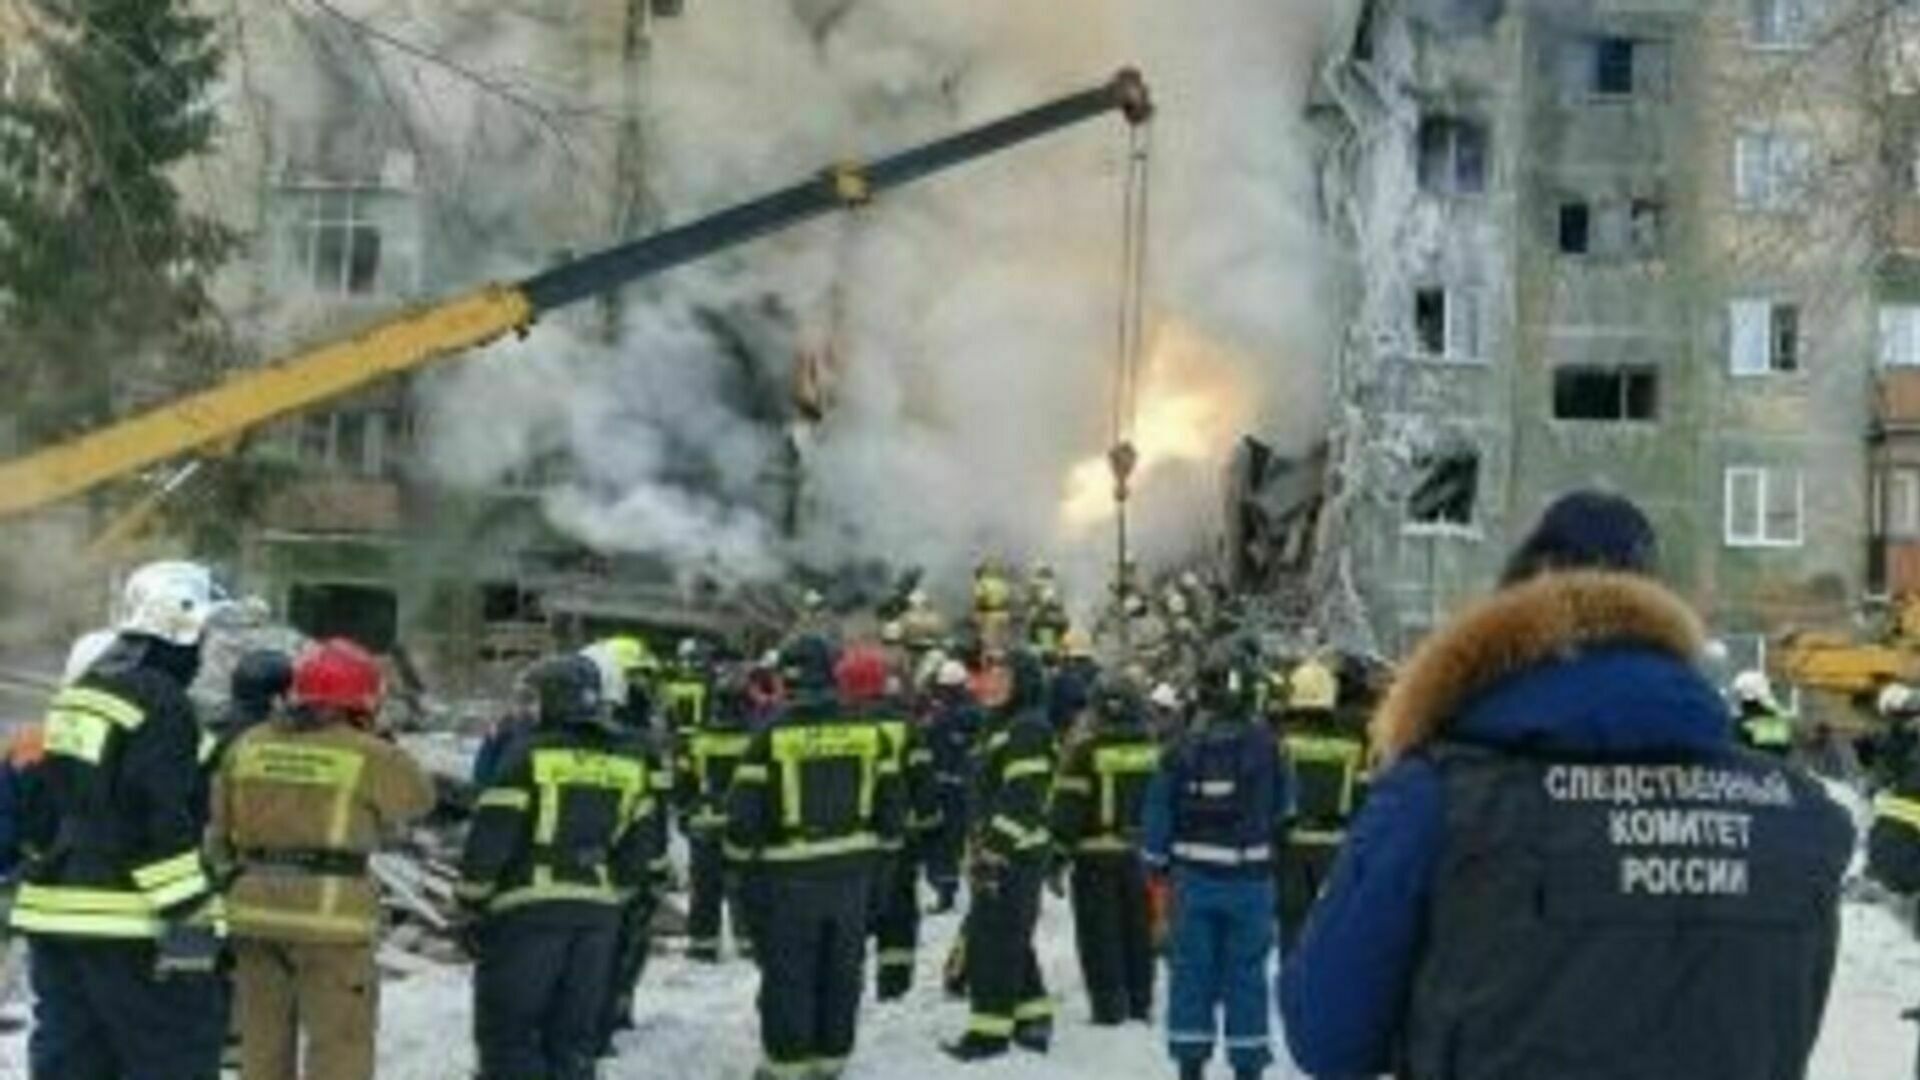 Rescuers have finished sifting through the wreckage of the exploded house in Novosibirsk